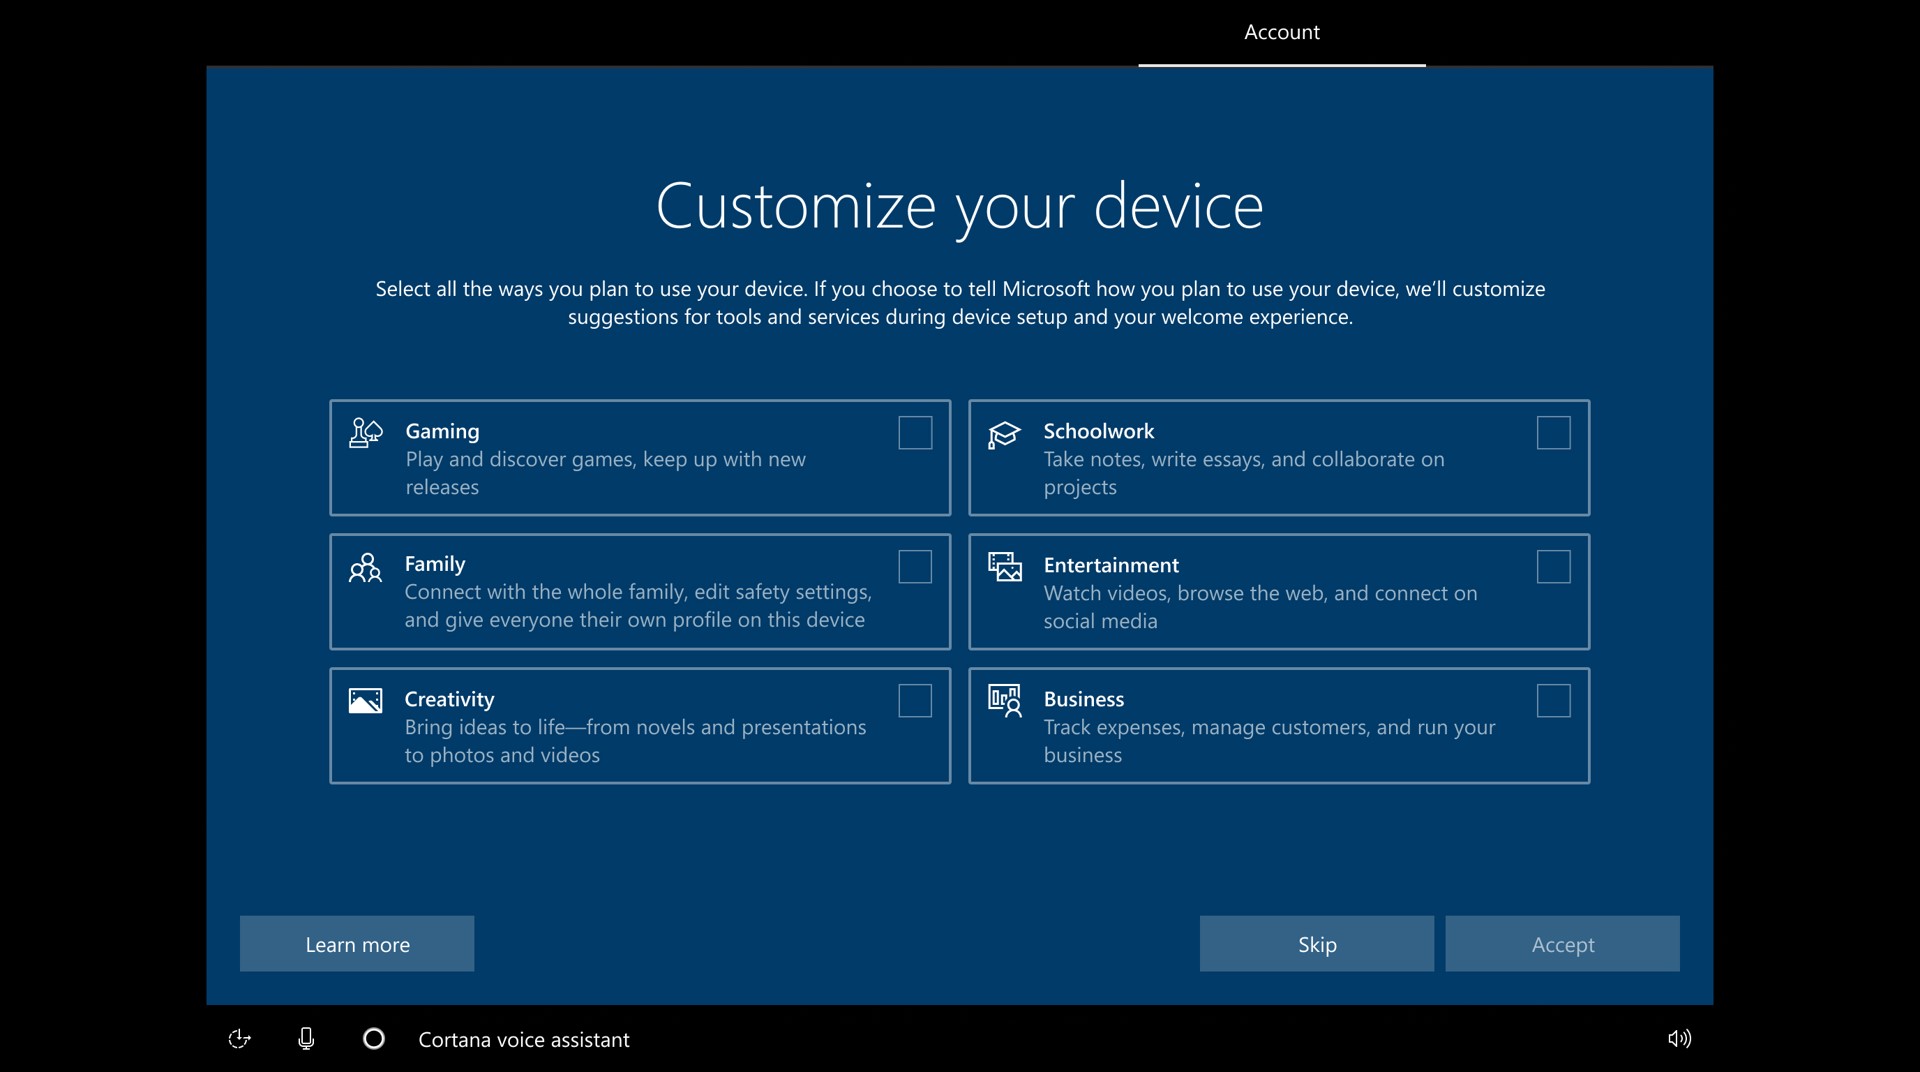 Windows 10 Insider Preview Build 20231.1000 (rs_prerelease) - Oct. 7 Intent.jpg